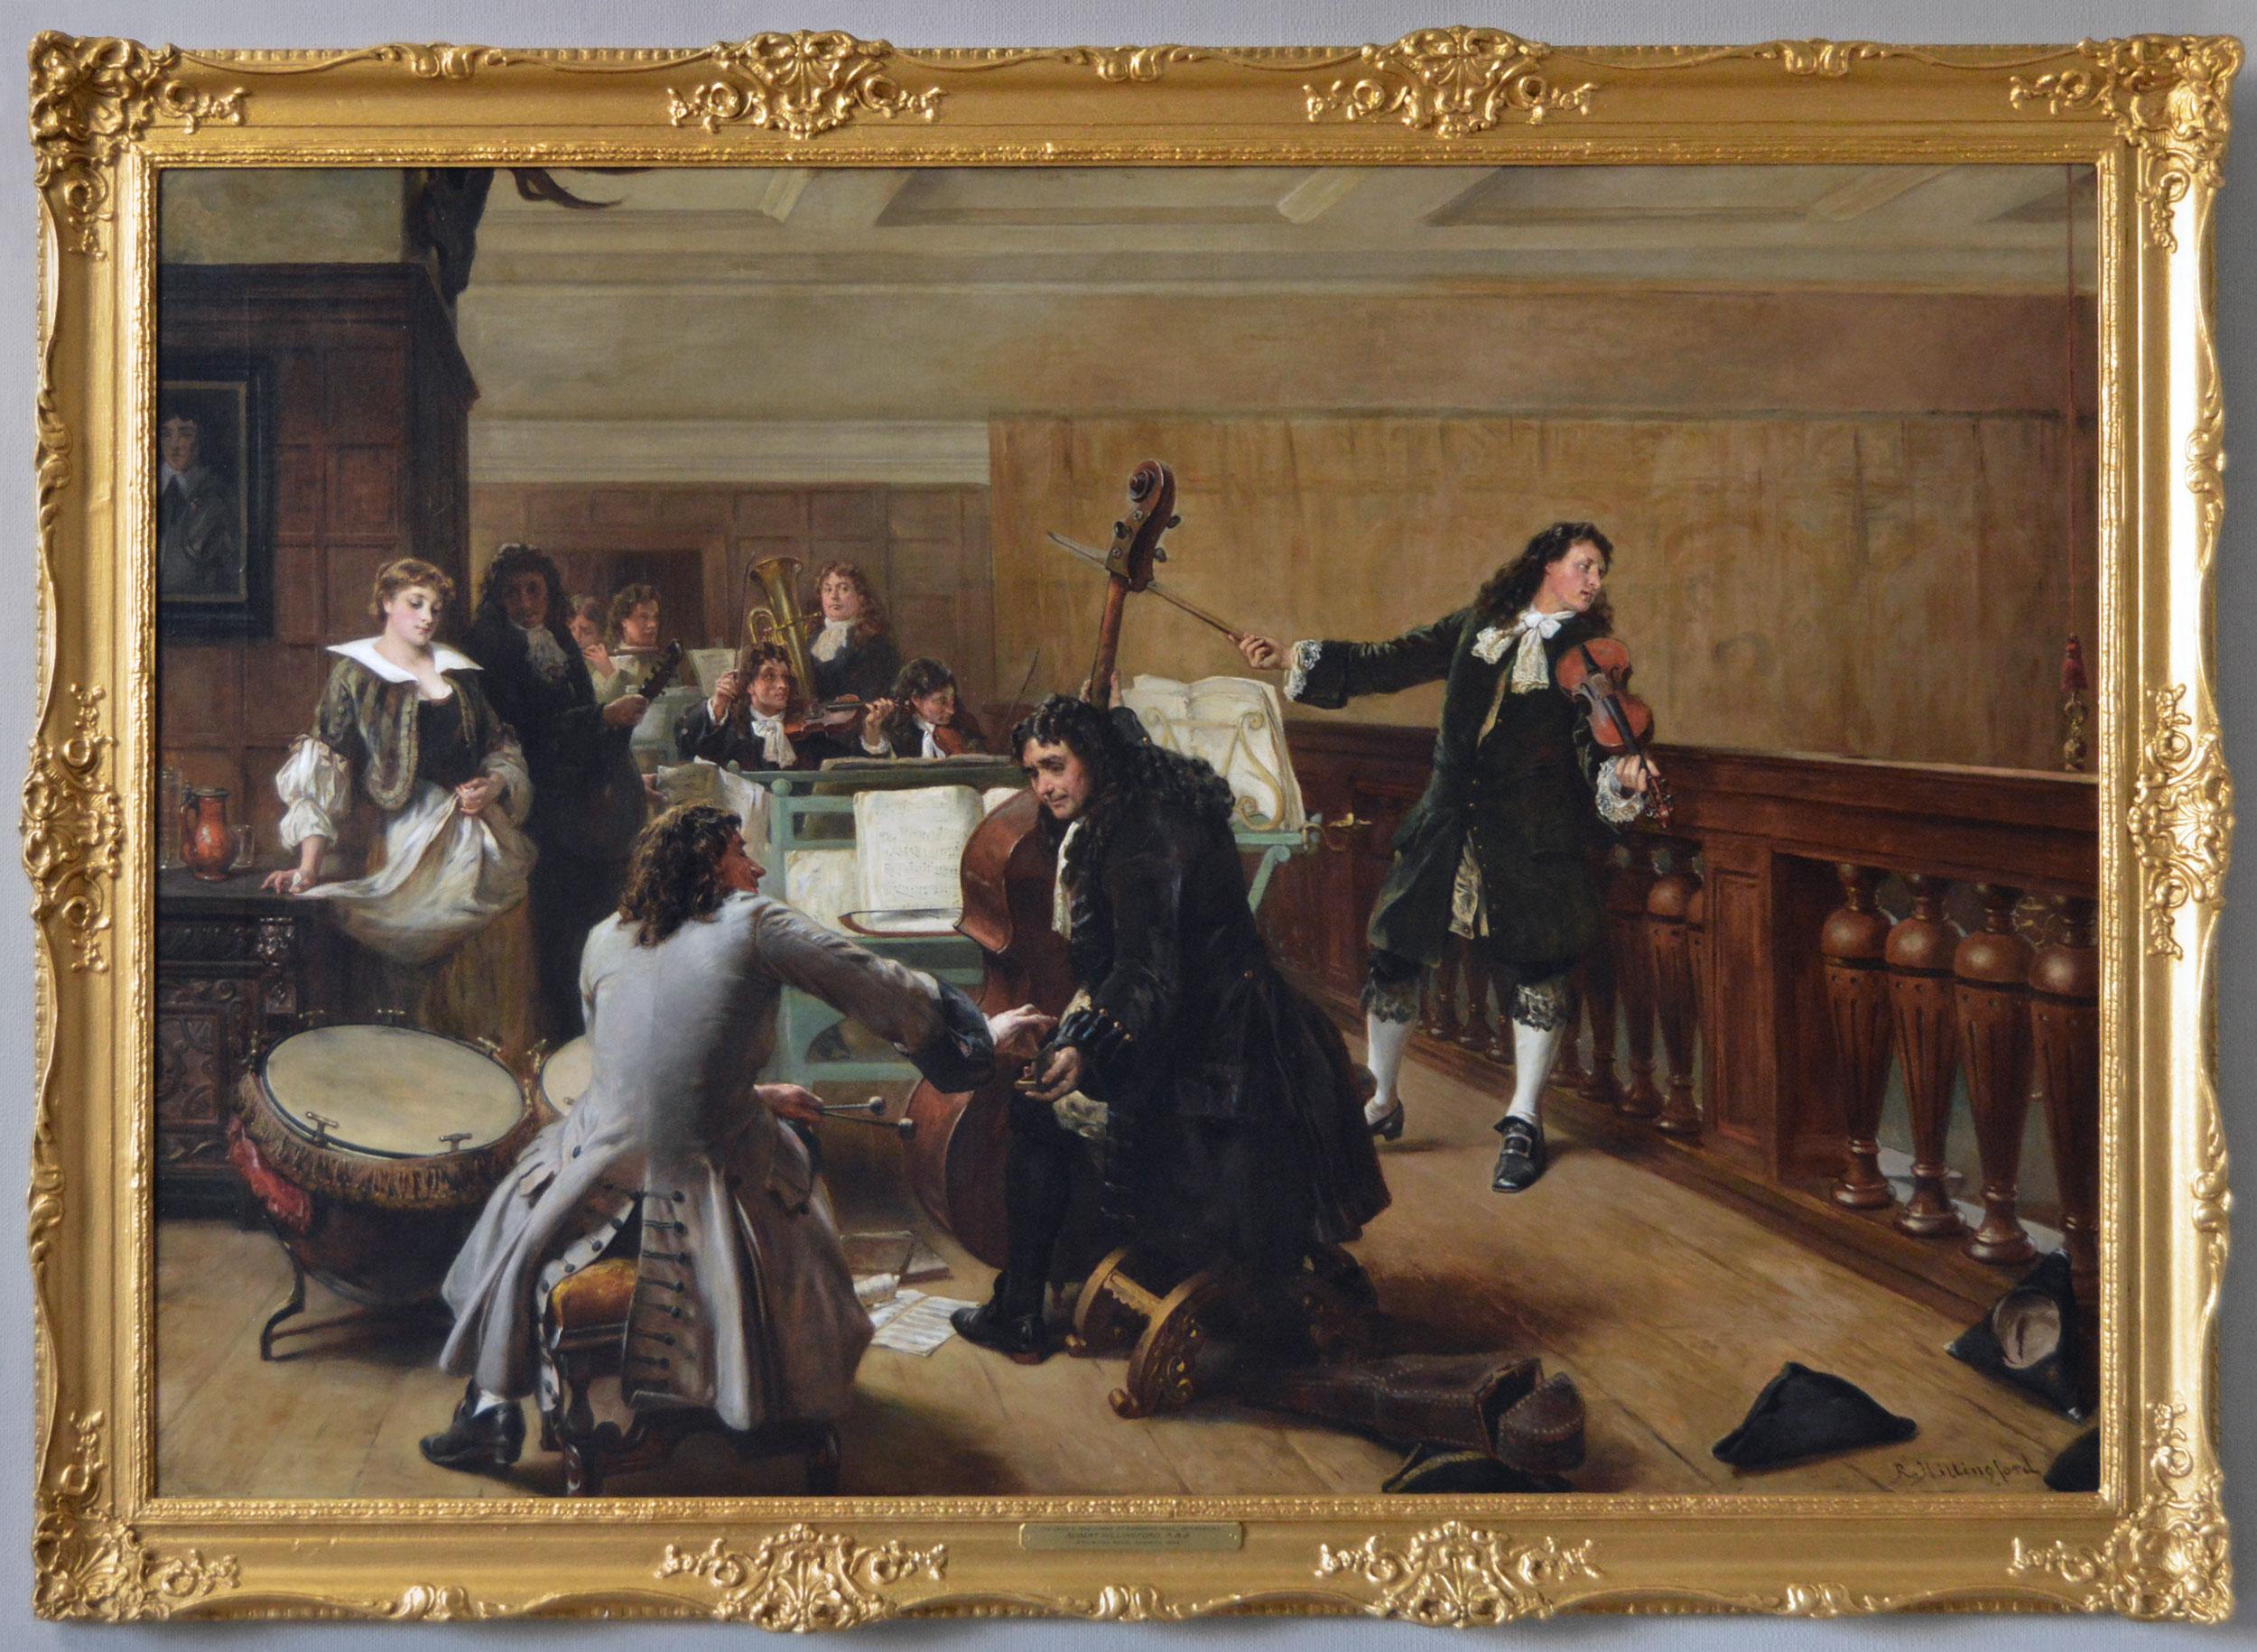 Robert Alexander Hillingford Figurative Painting - Large scale 19th Century historical genre oil painting of a group of musicians